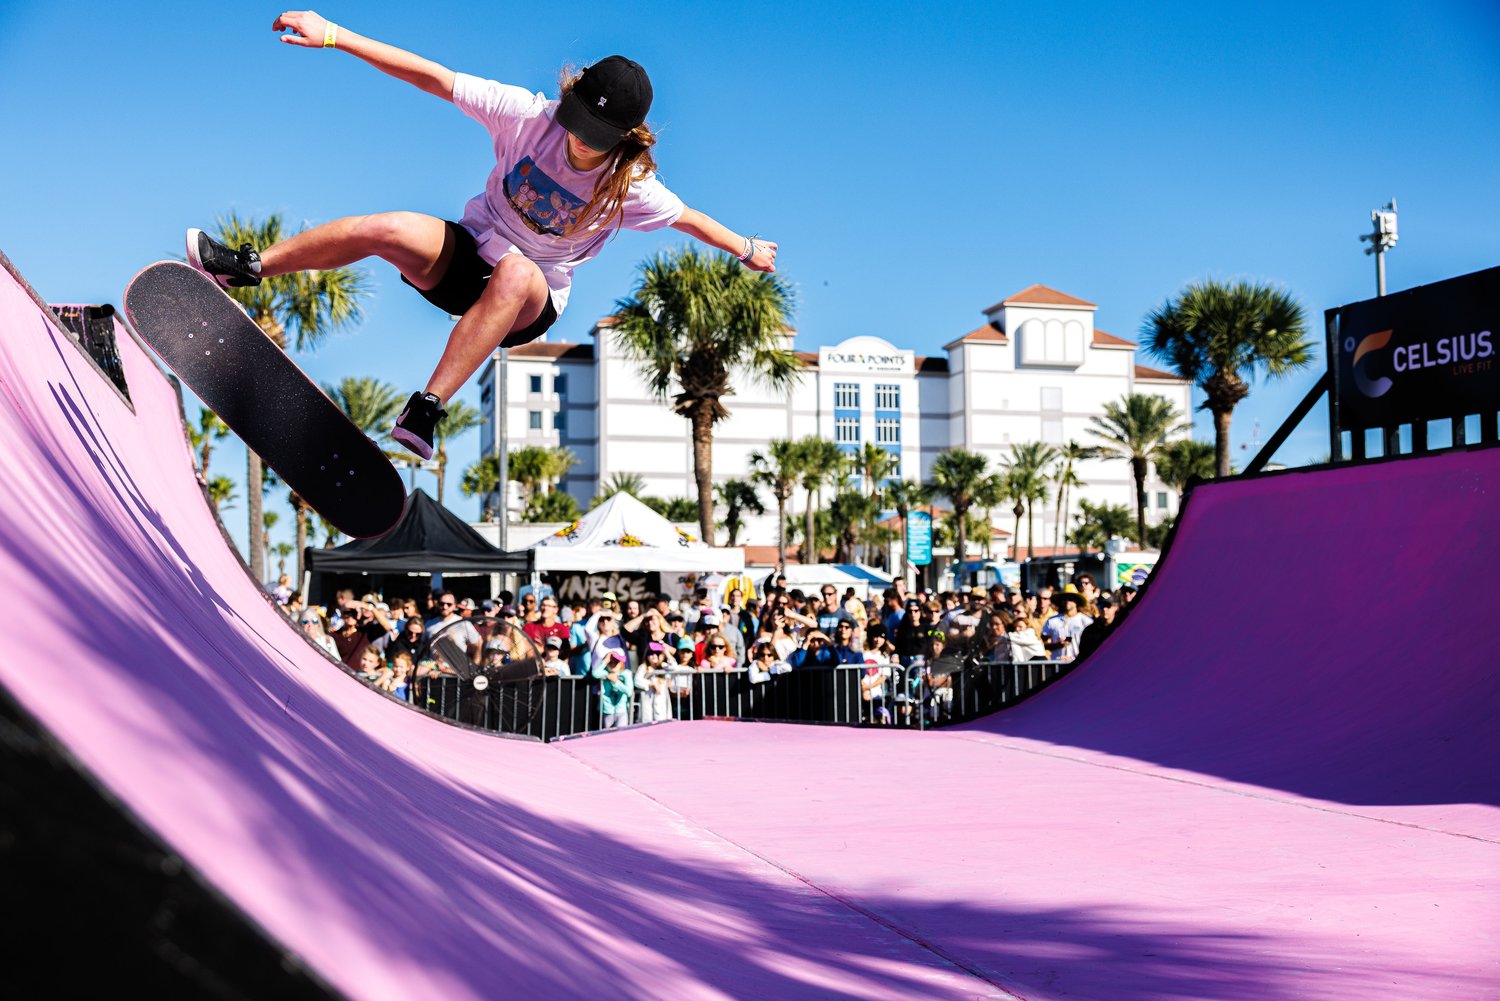 In addition to surfing, there will be other events, such as this skateboarding competition in Jacksonville Beach in 2021.